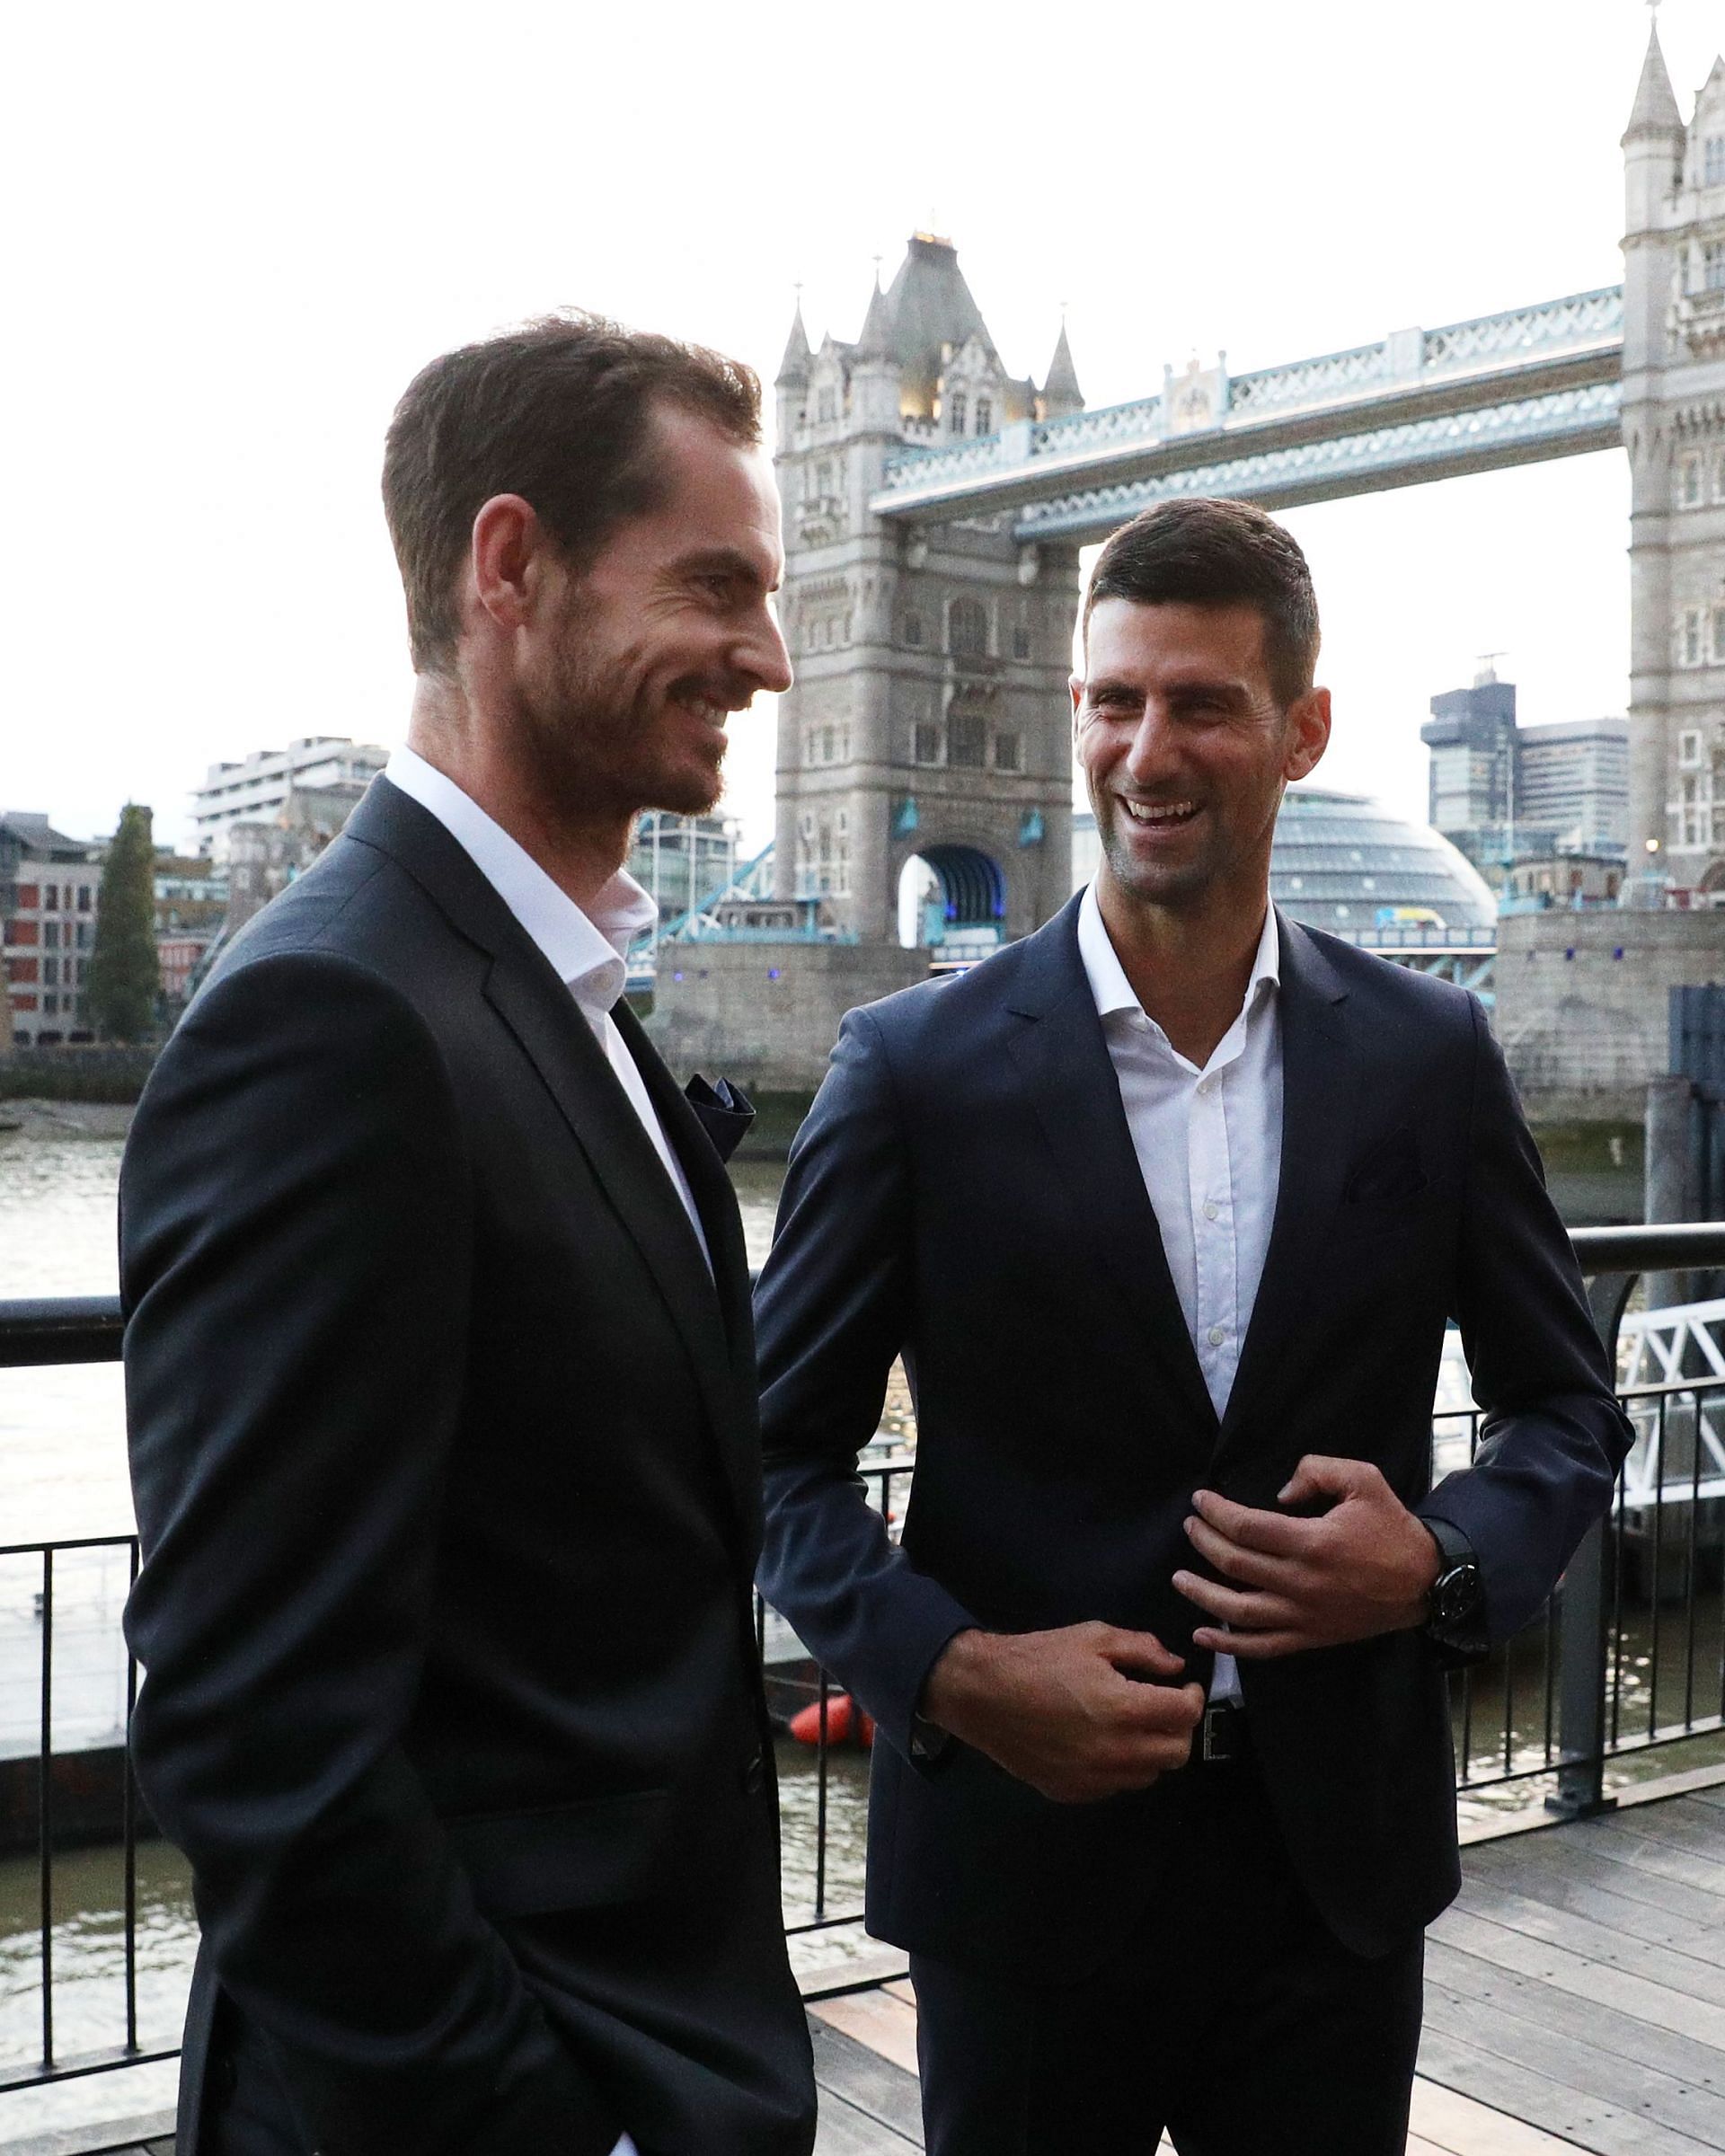 Andy Murray and Novak Djokovic are dressed in suits for Laver Cup pre-tournament activities.